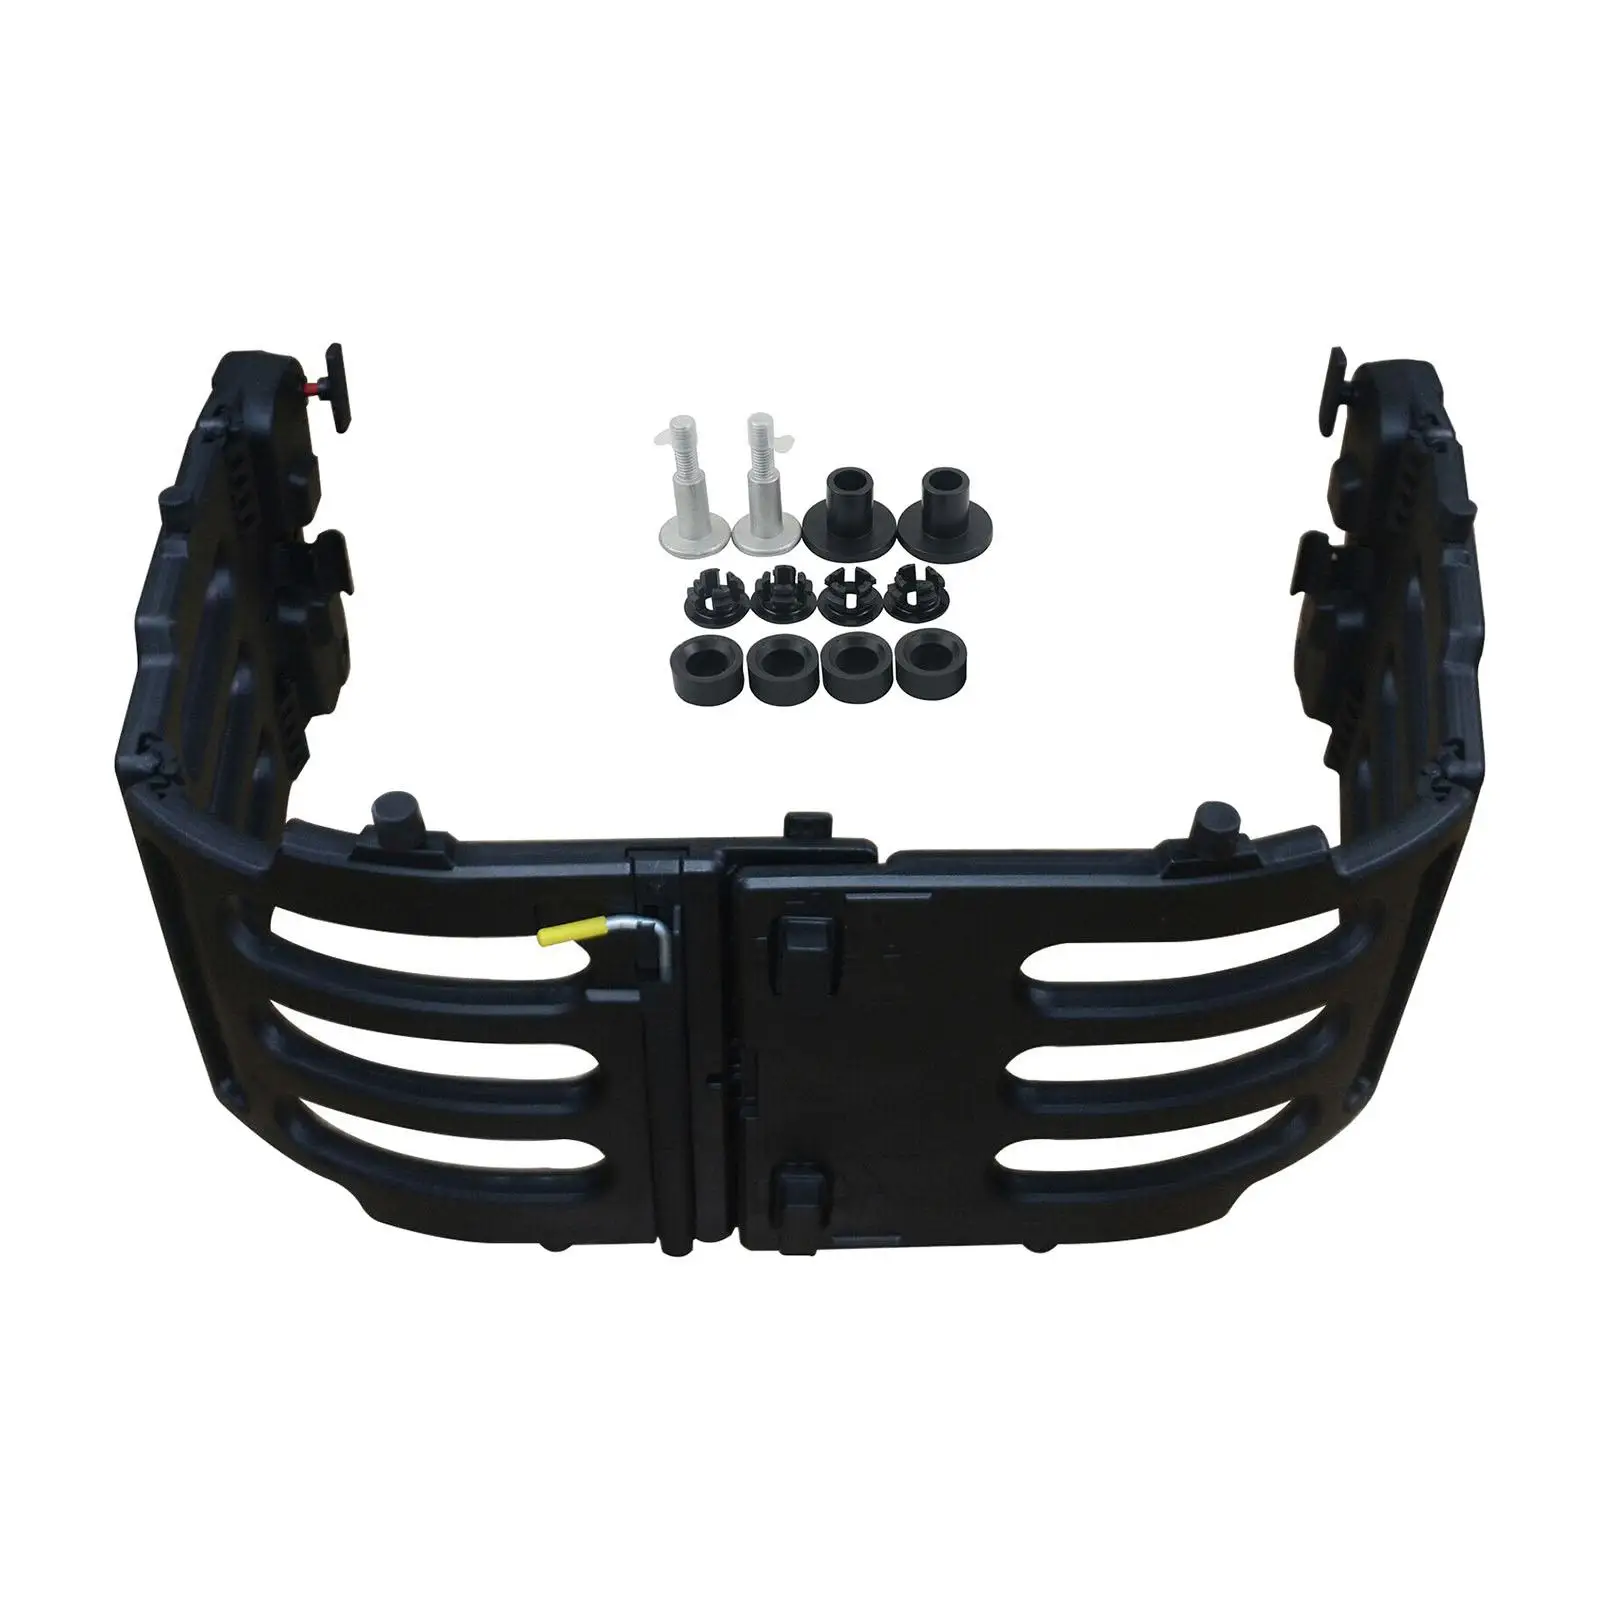 Stowable Truck Bed Extender Kit fl3Z-99286A40-C for Ford F150 2015-2021 Spare Parts